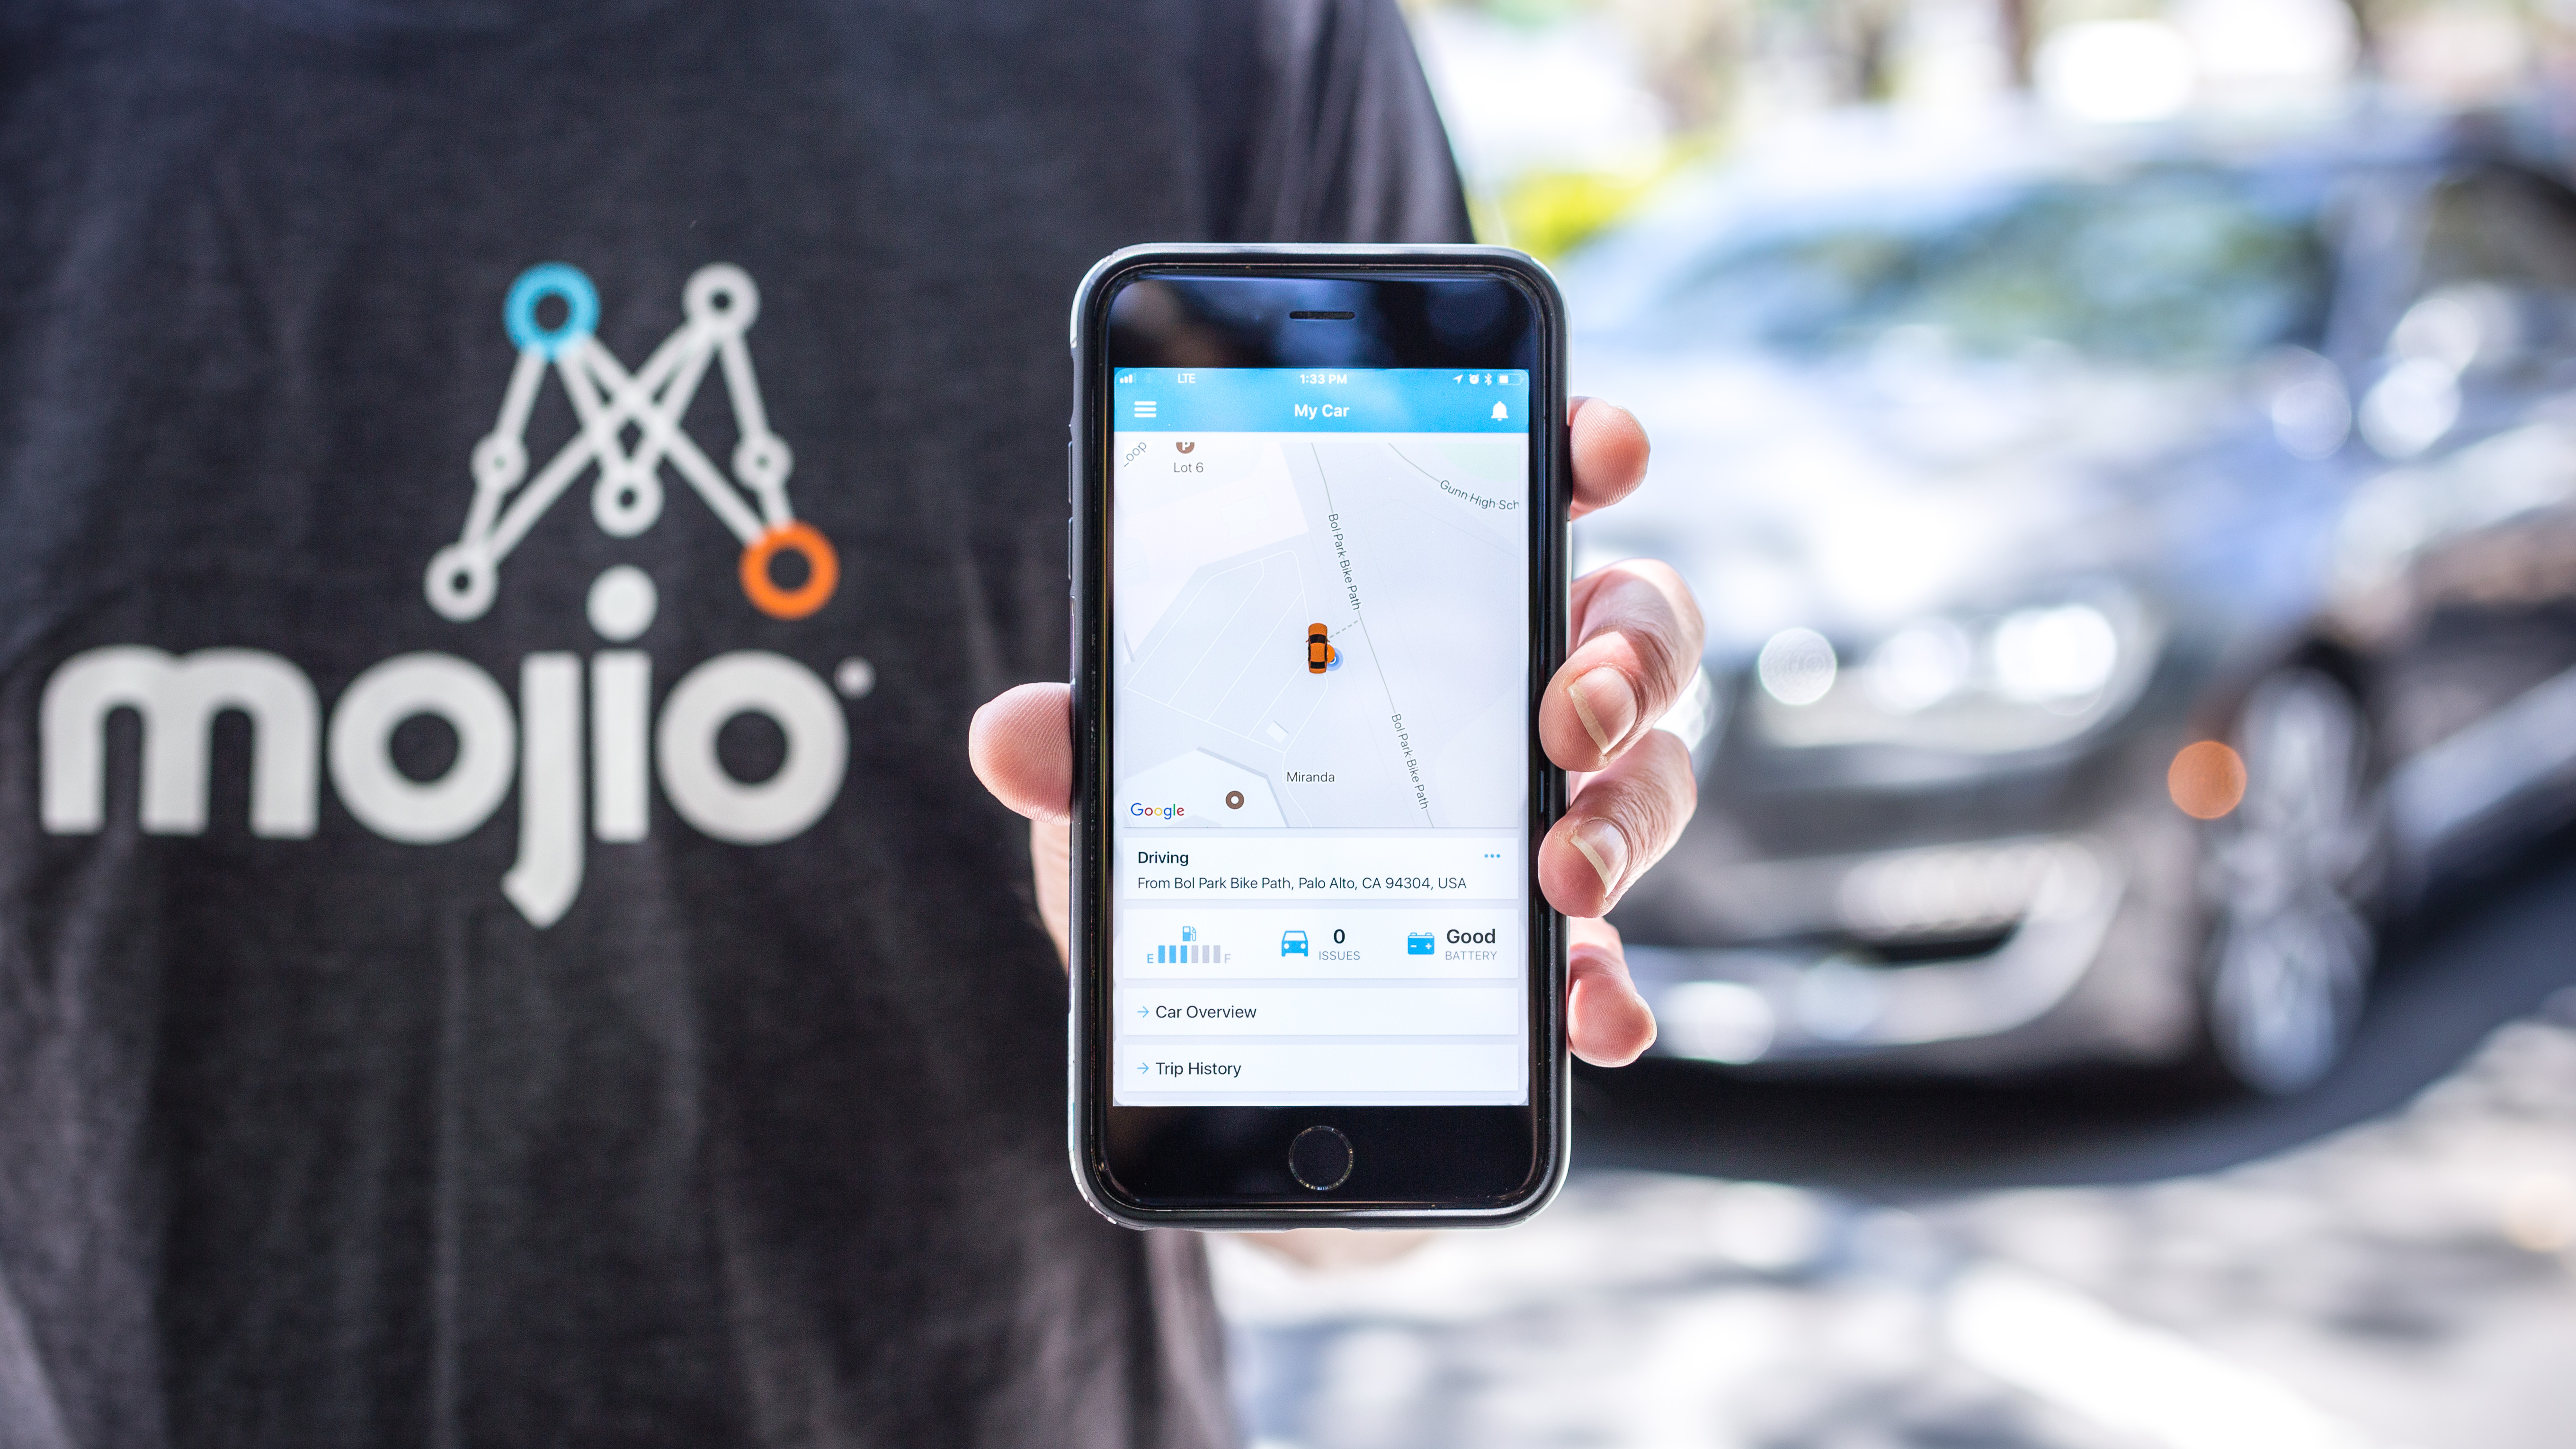 Mojio has gathered real-world data from more than 7 billion miles of driving as part of its platform service that delivers connected car experiences to subscribers of major network operators in North America and Europe.